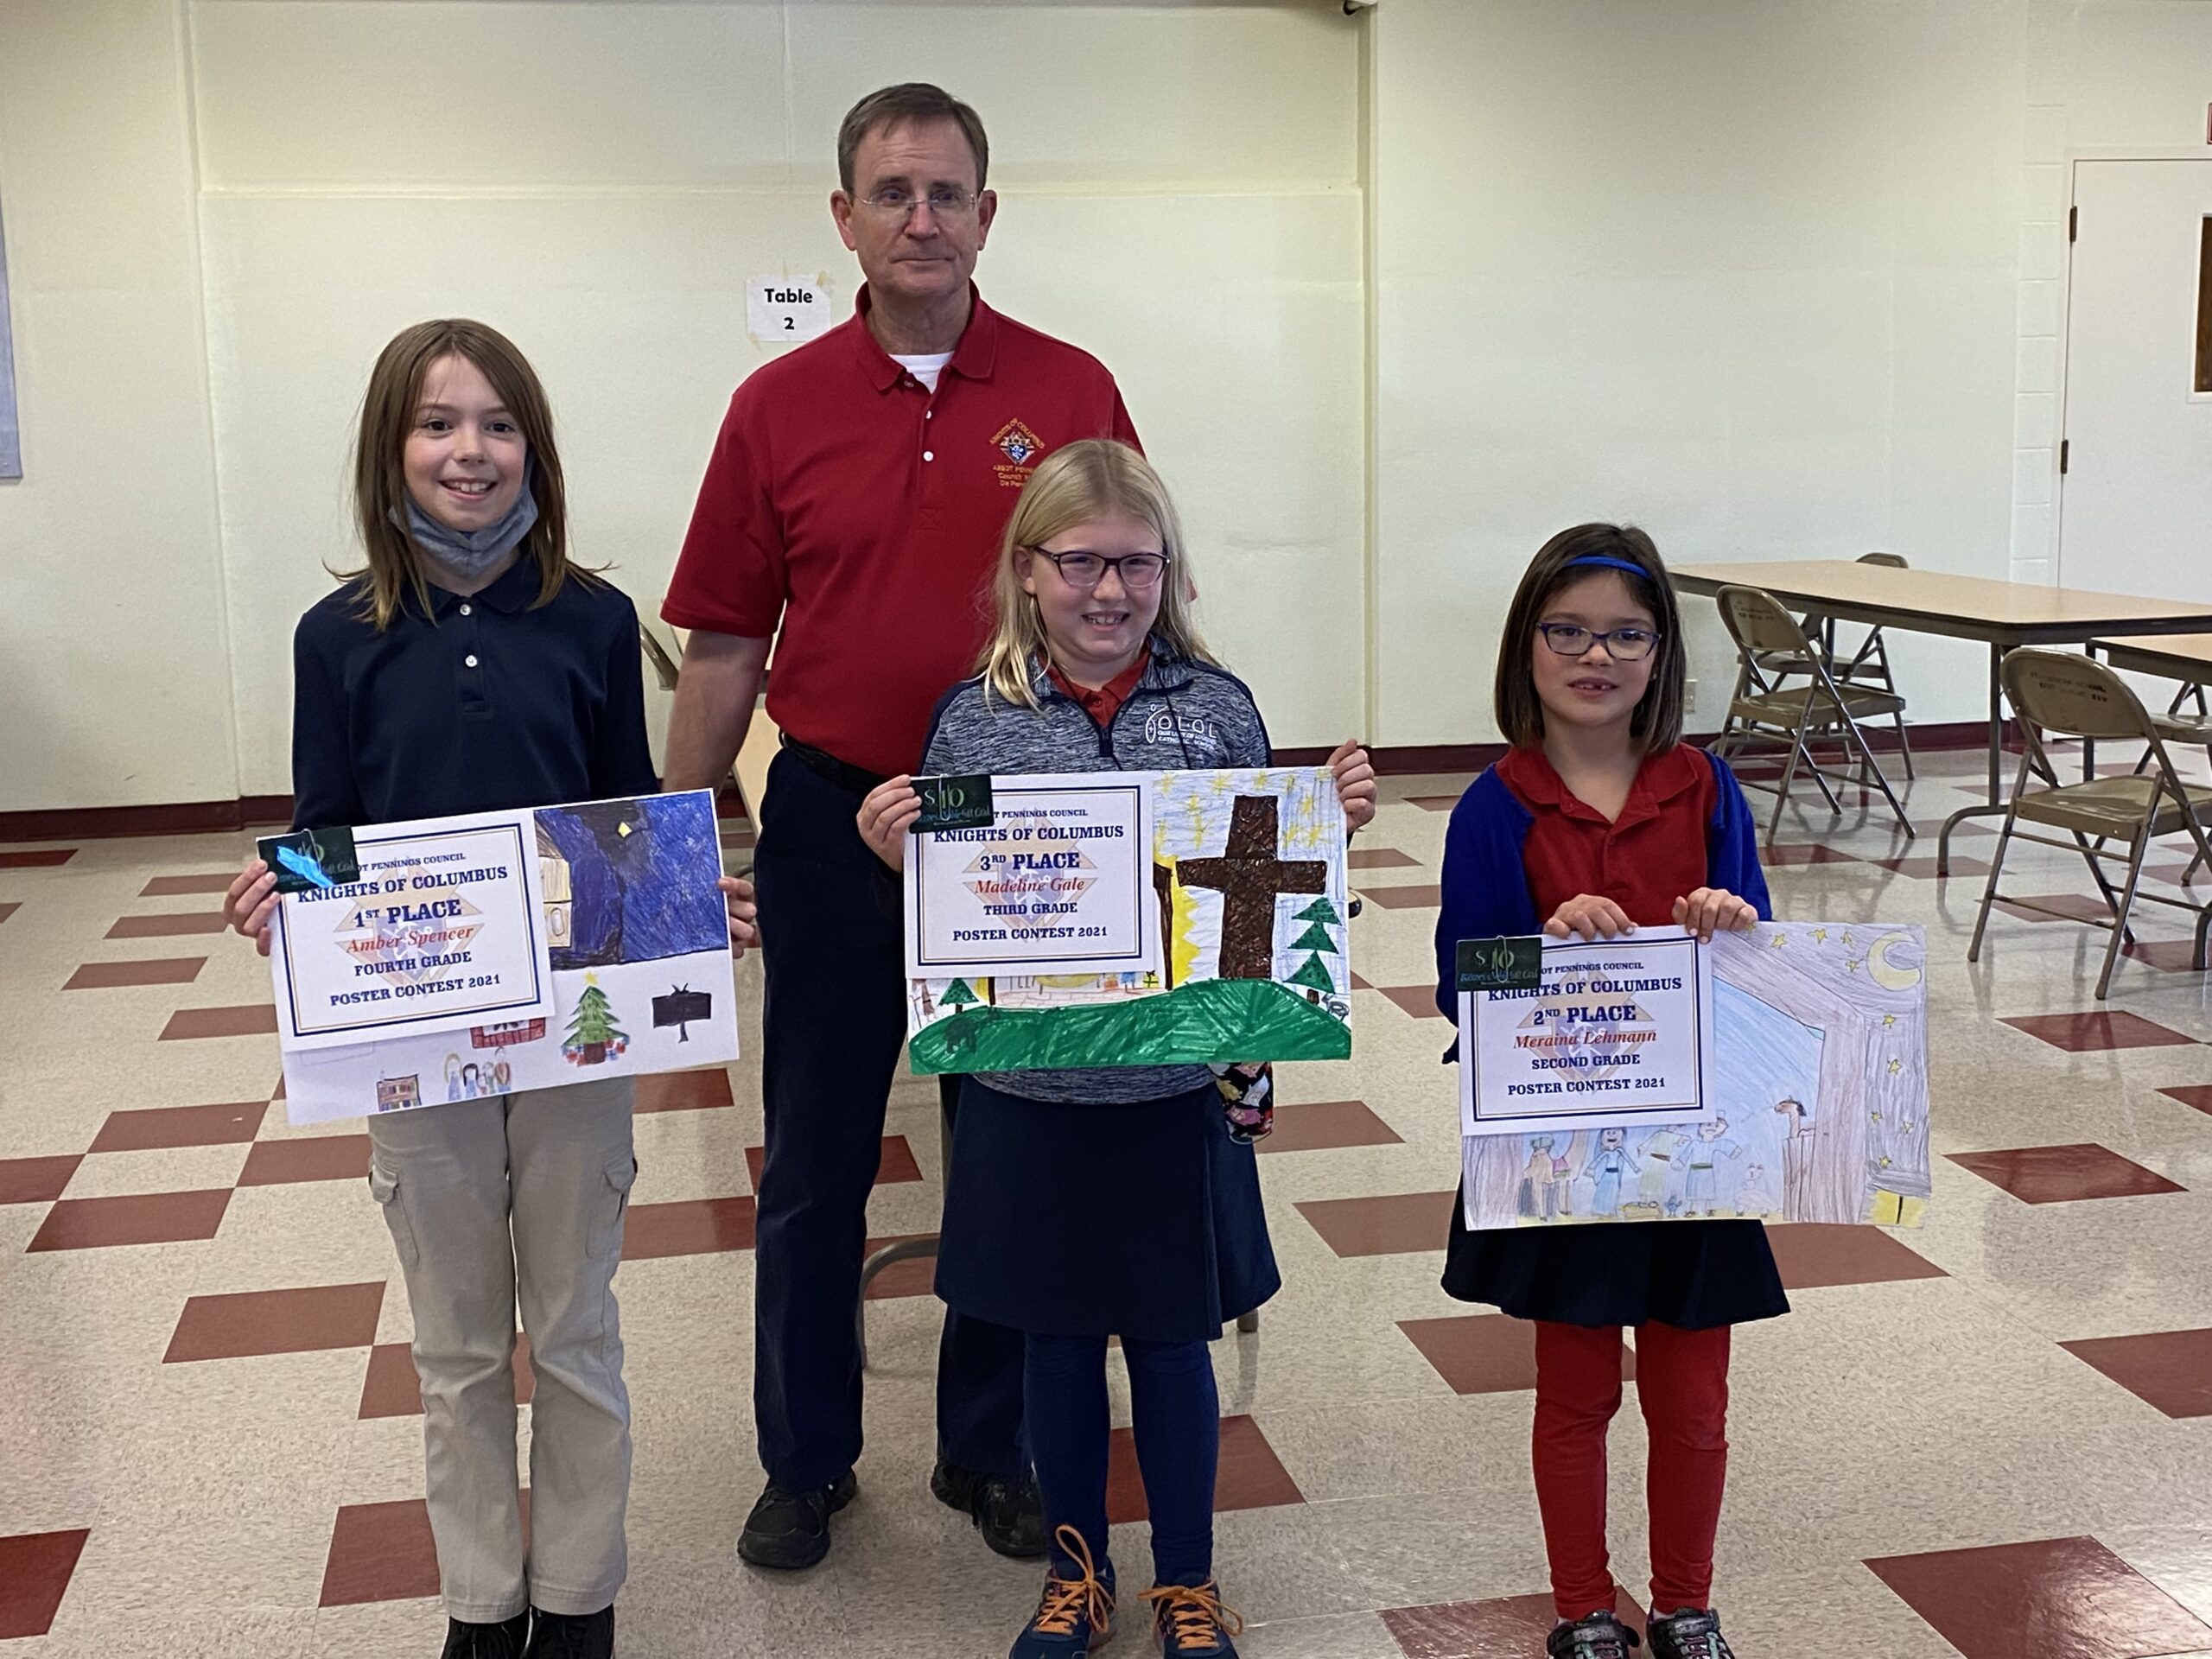 Our Lady of Lourdes Catholic School poster winners